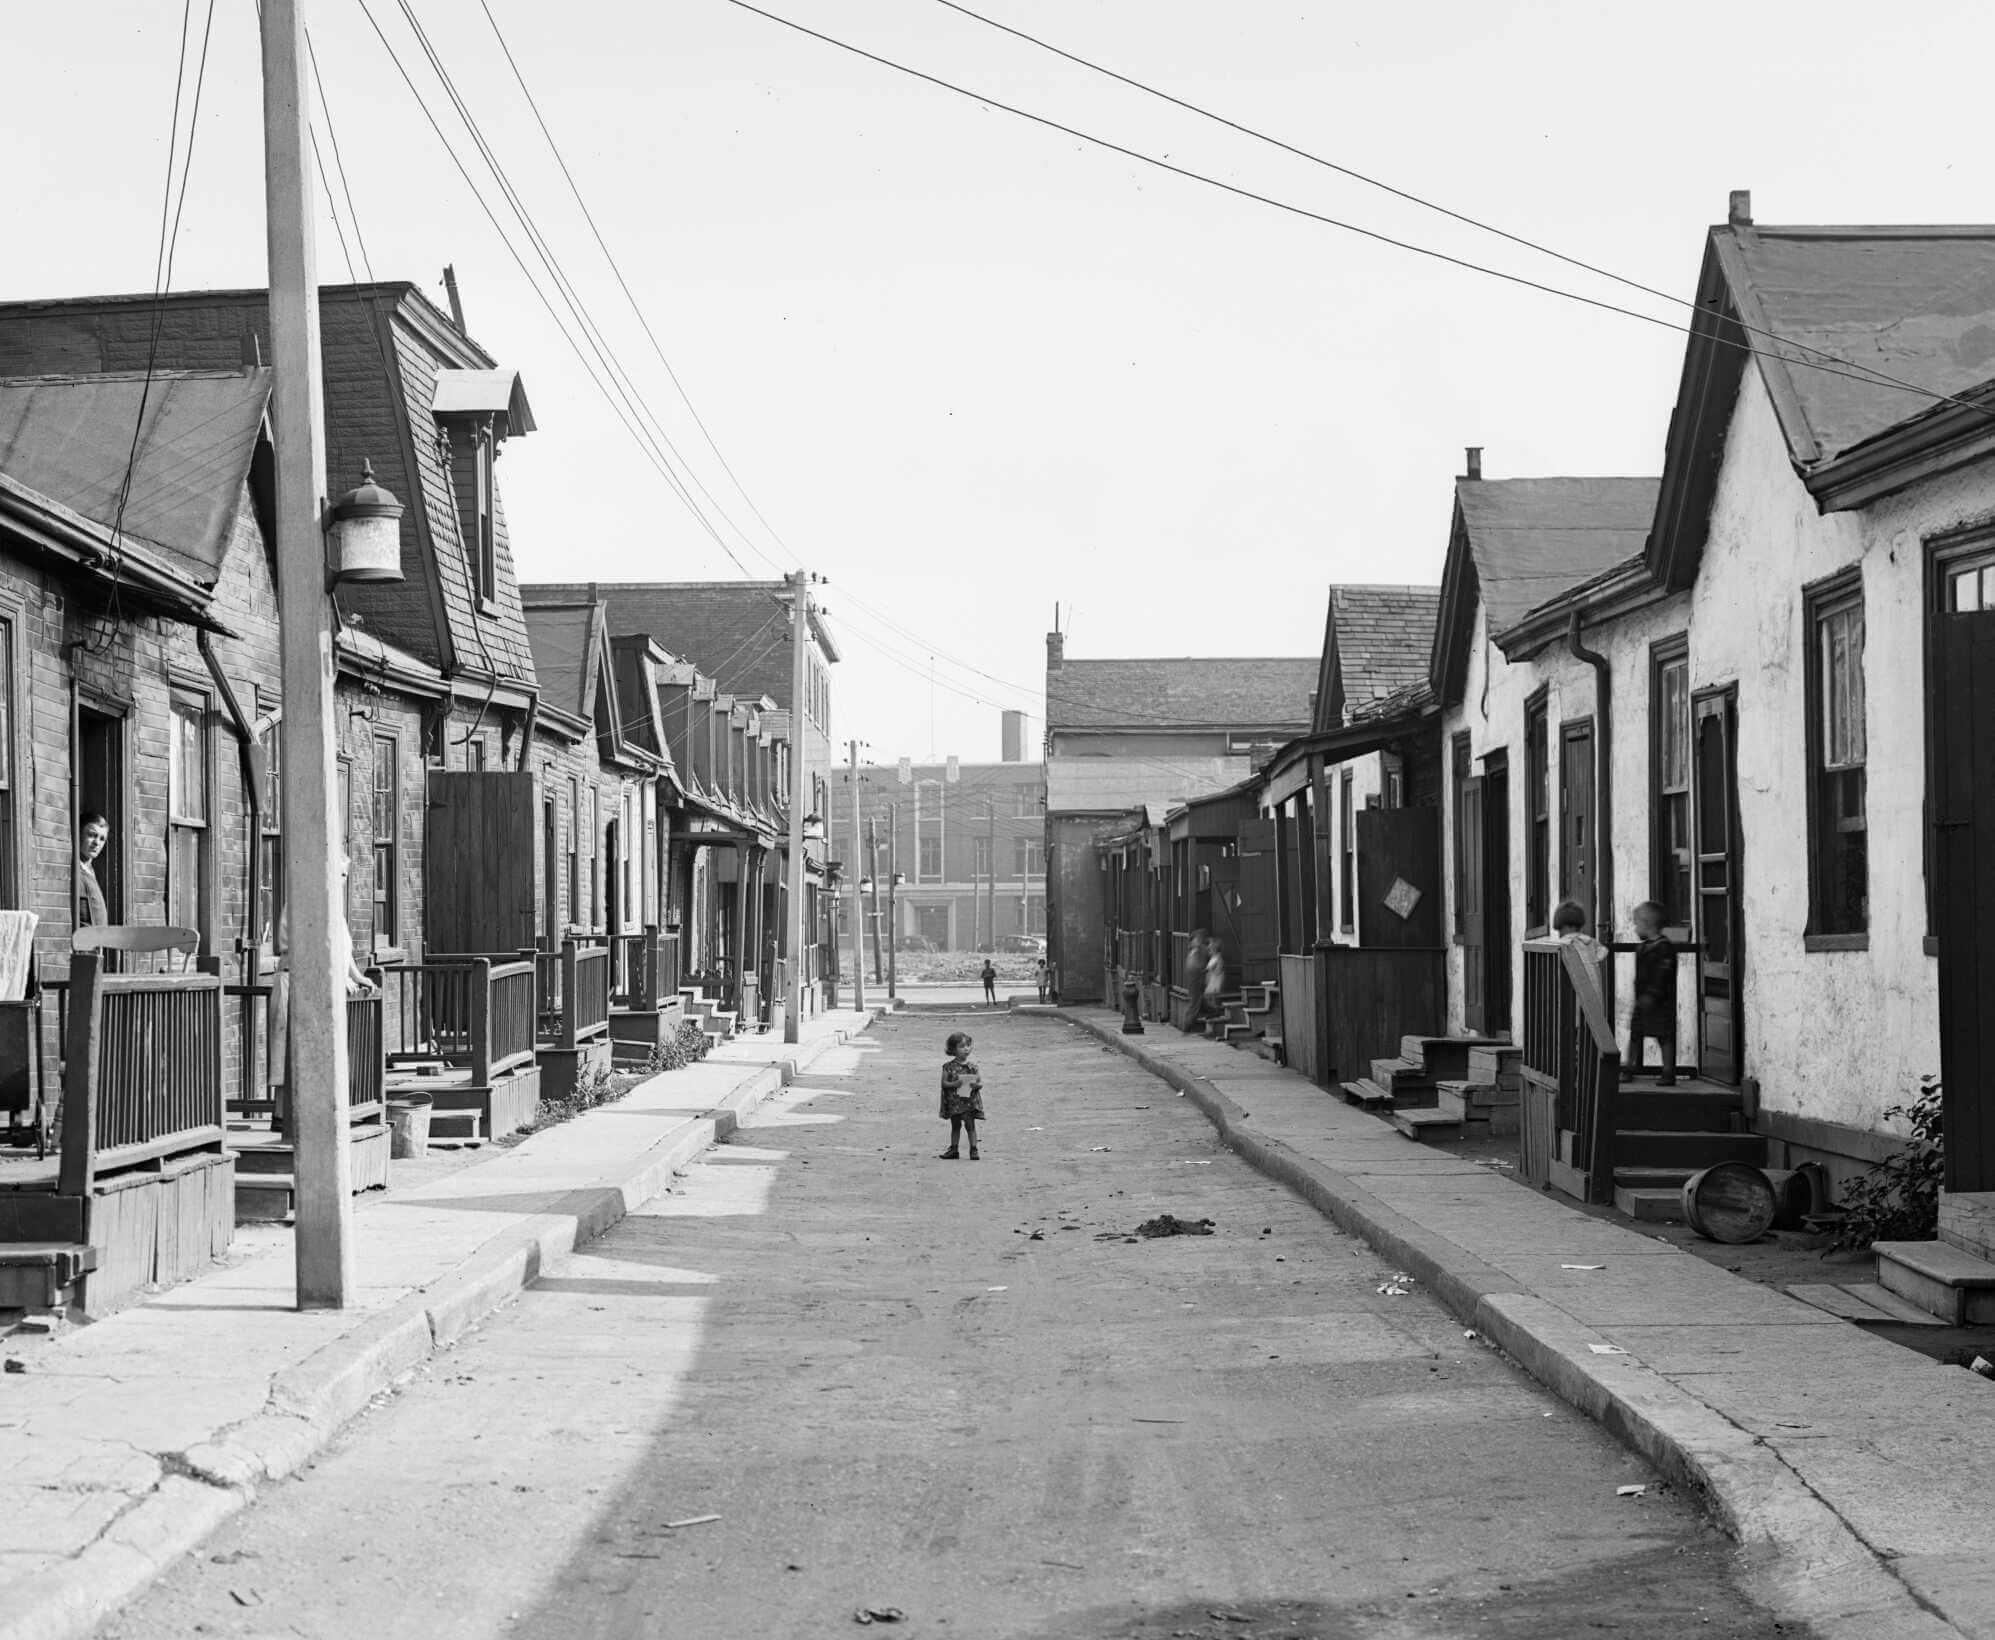 Black and white photograph looking down a desolate street. There are a few children scattered through the foreground and background playing games.